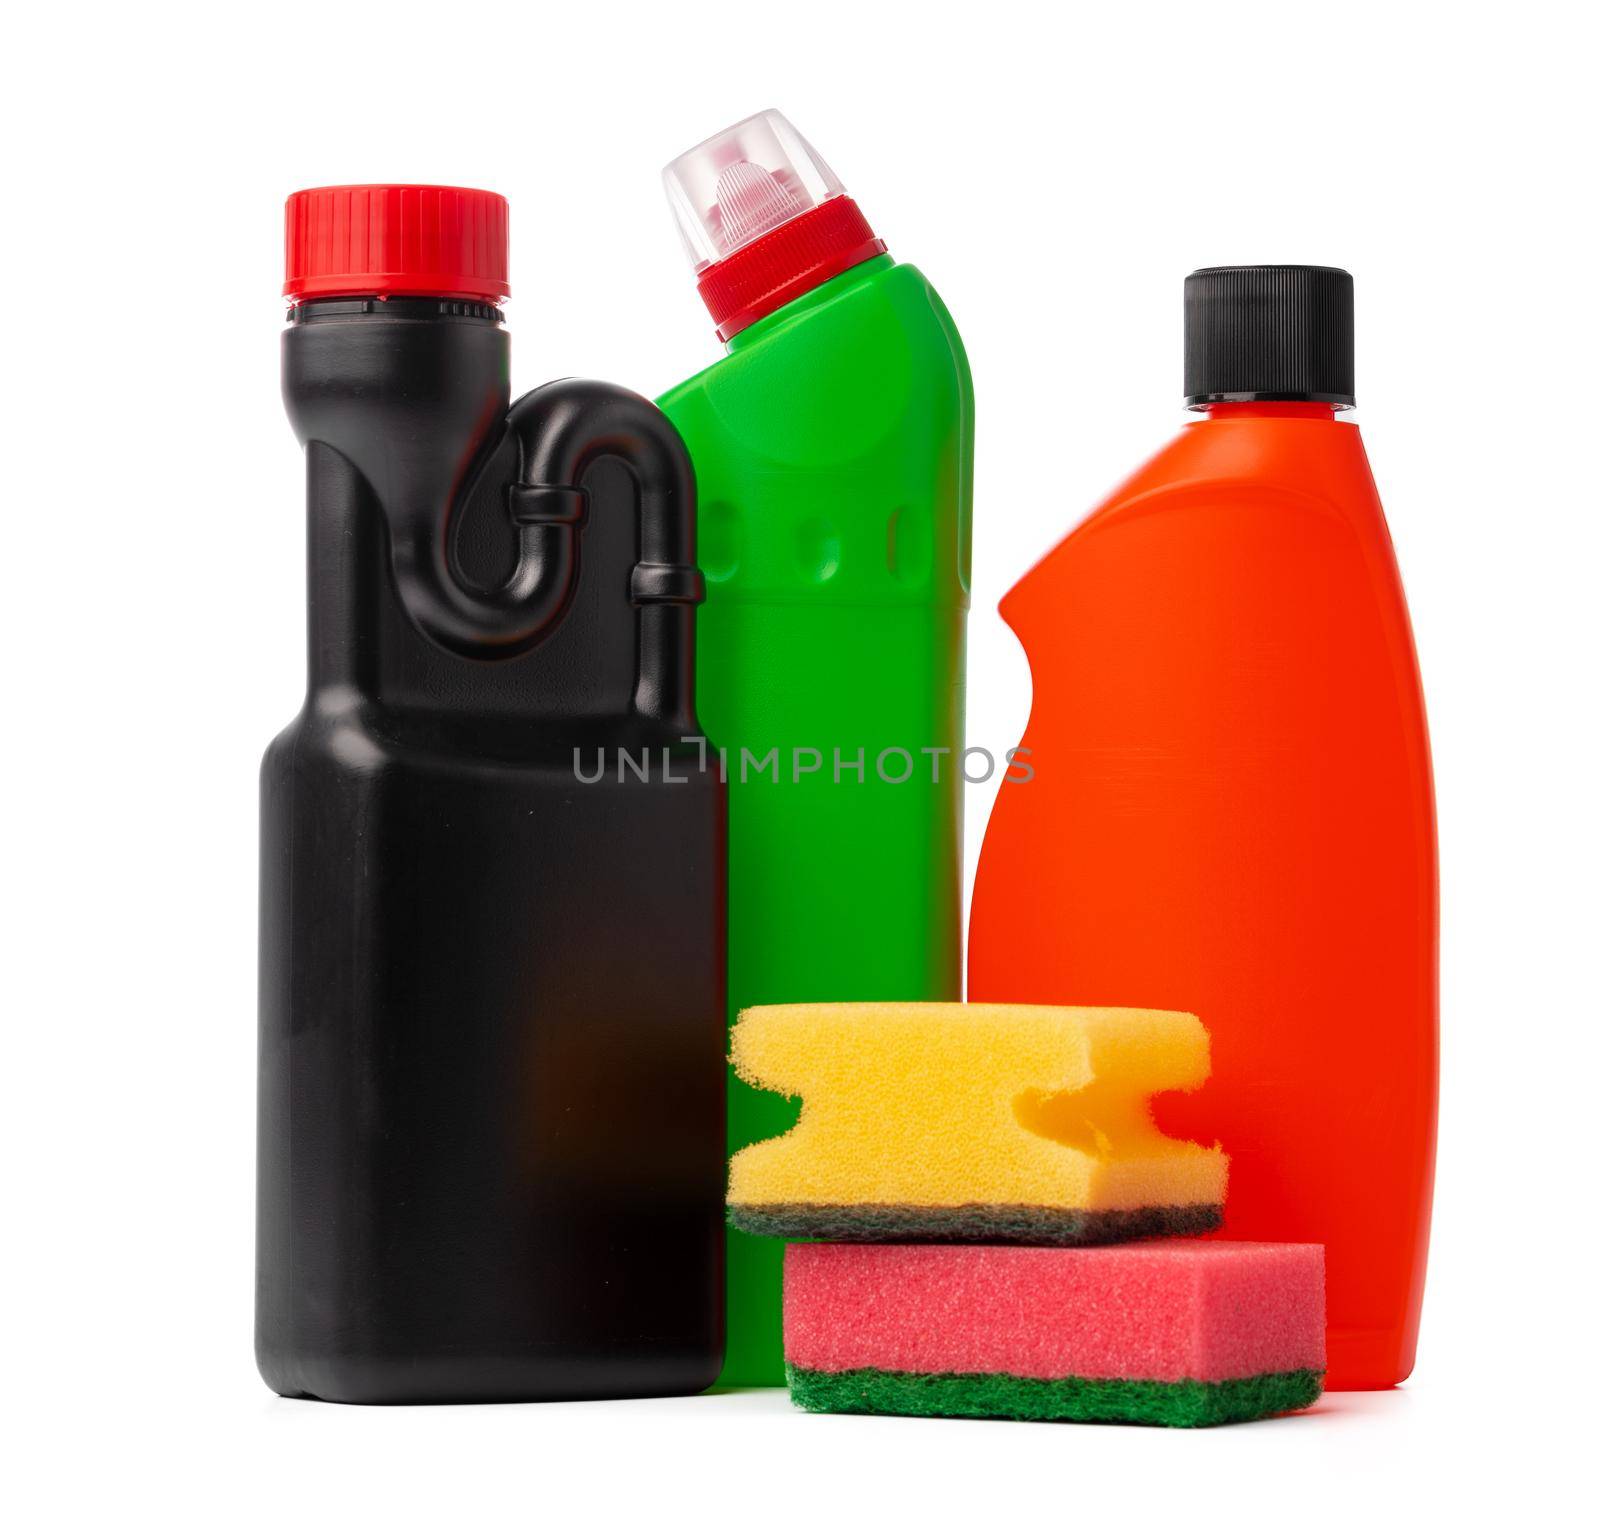 Bottles with cleaning products and sponge on a white isolated background by Fabrikasimf